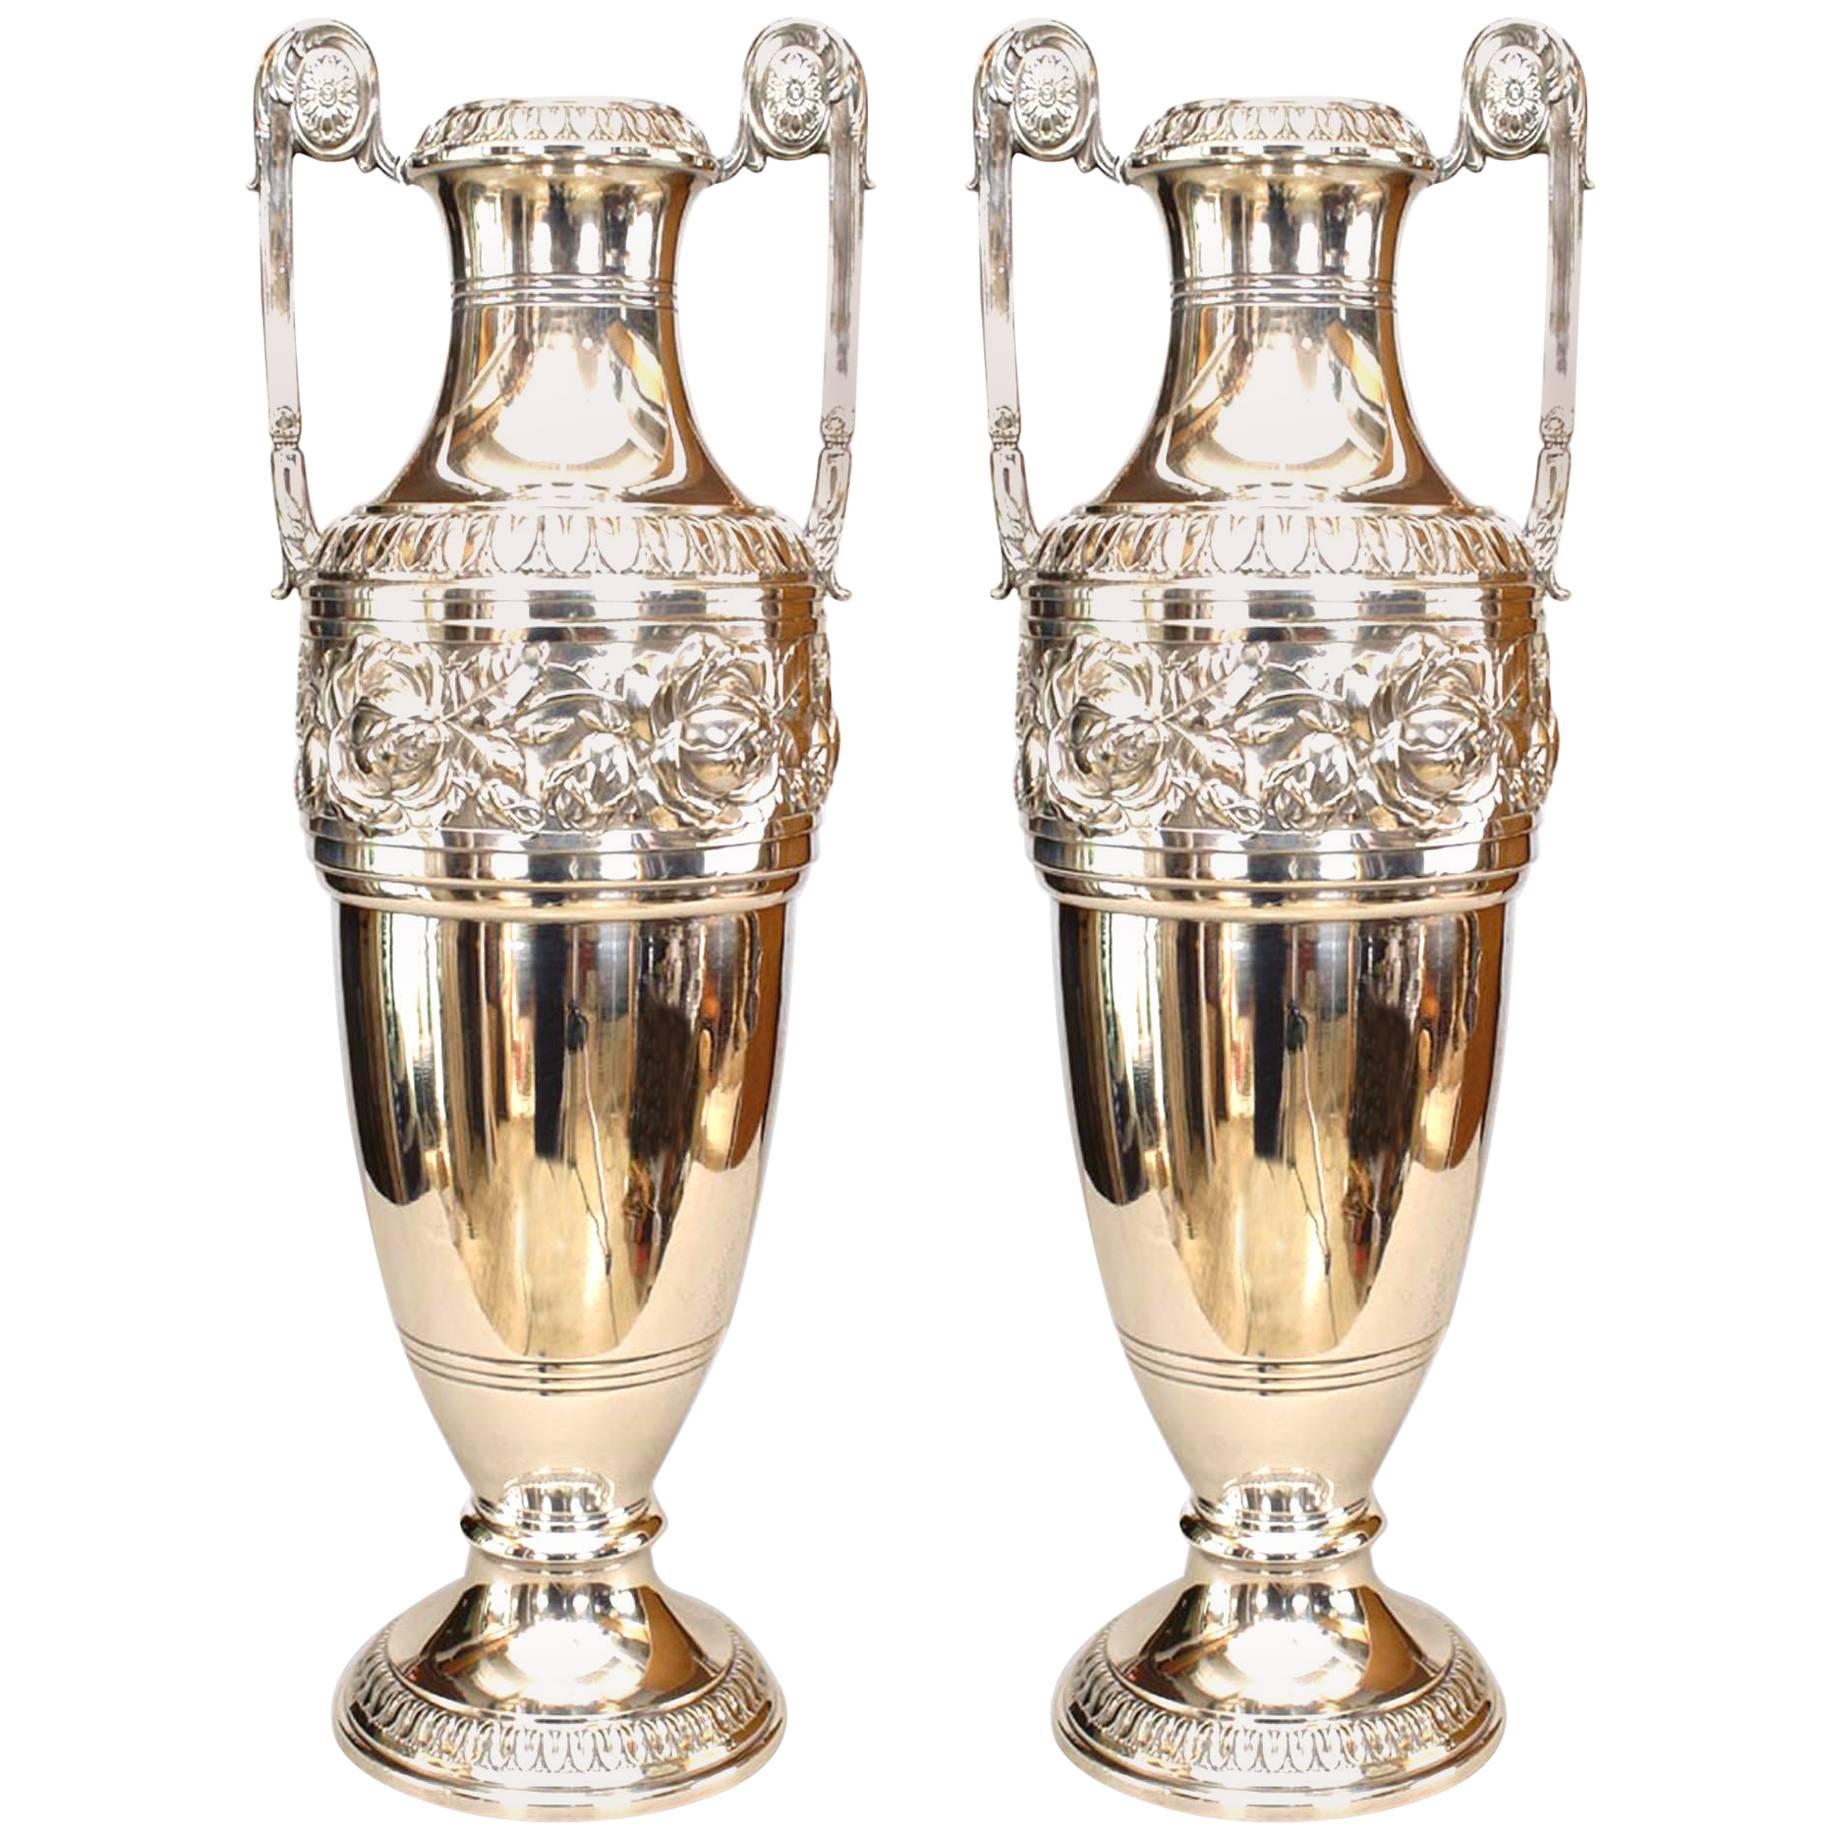 Pair of English Georgian Silver Plated Vases